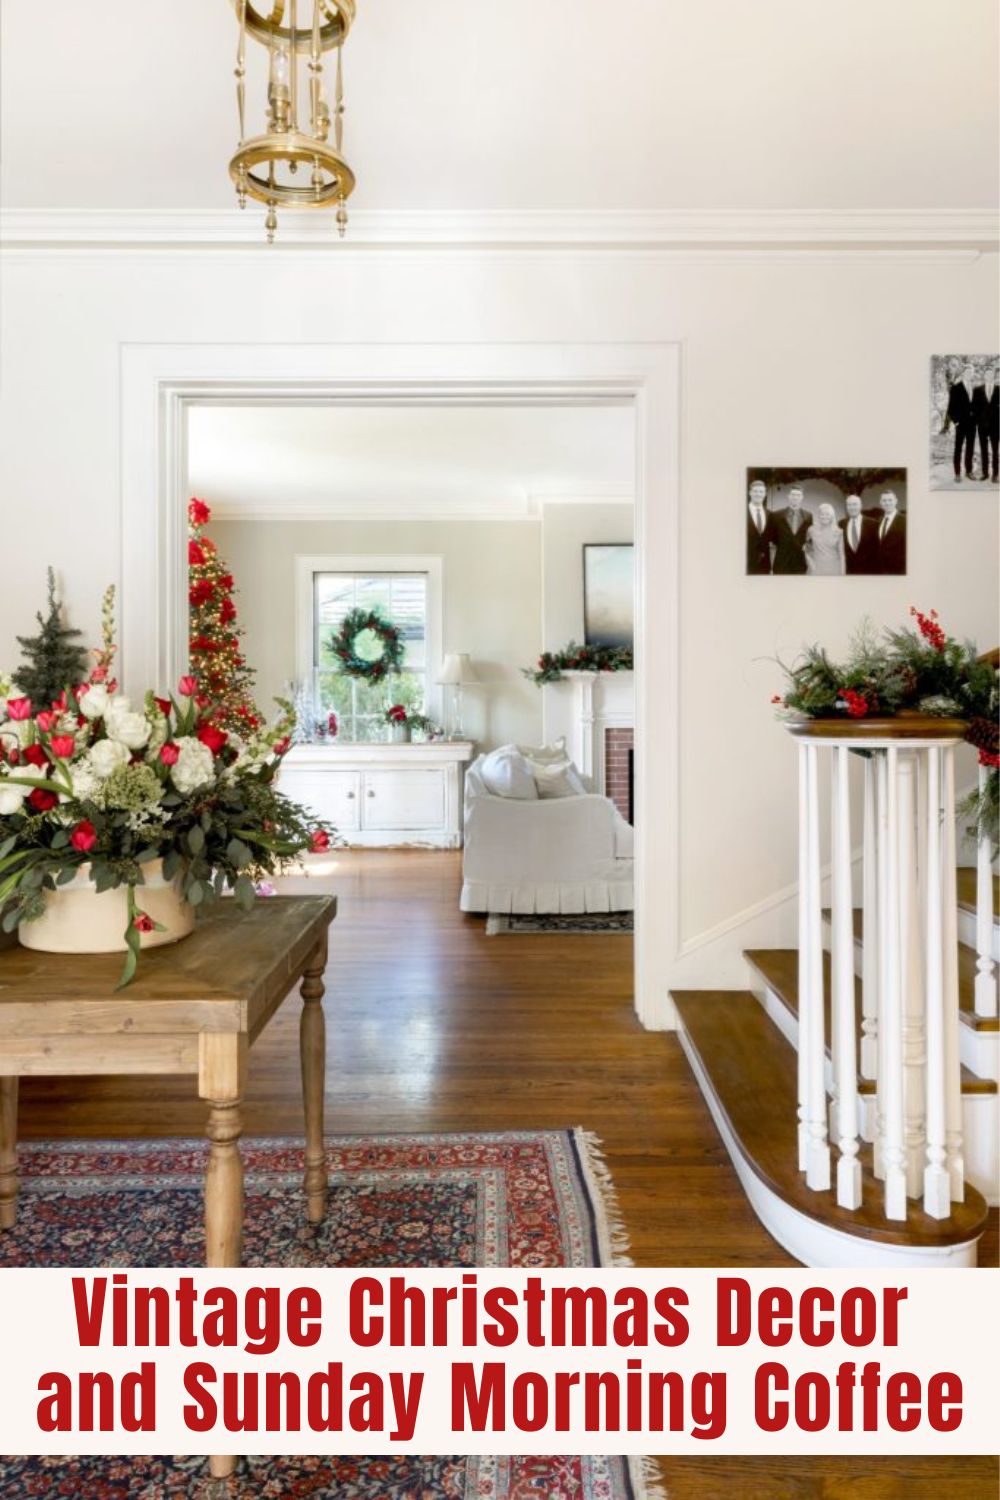 I get asked all of the time if I have a plan when it comes to decorating our home with my vintage Christmas decor. What do you think?